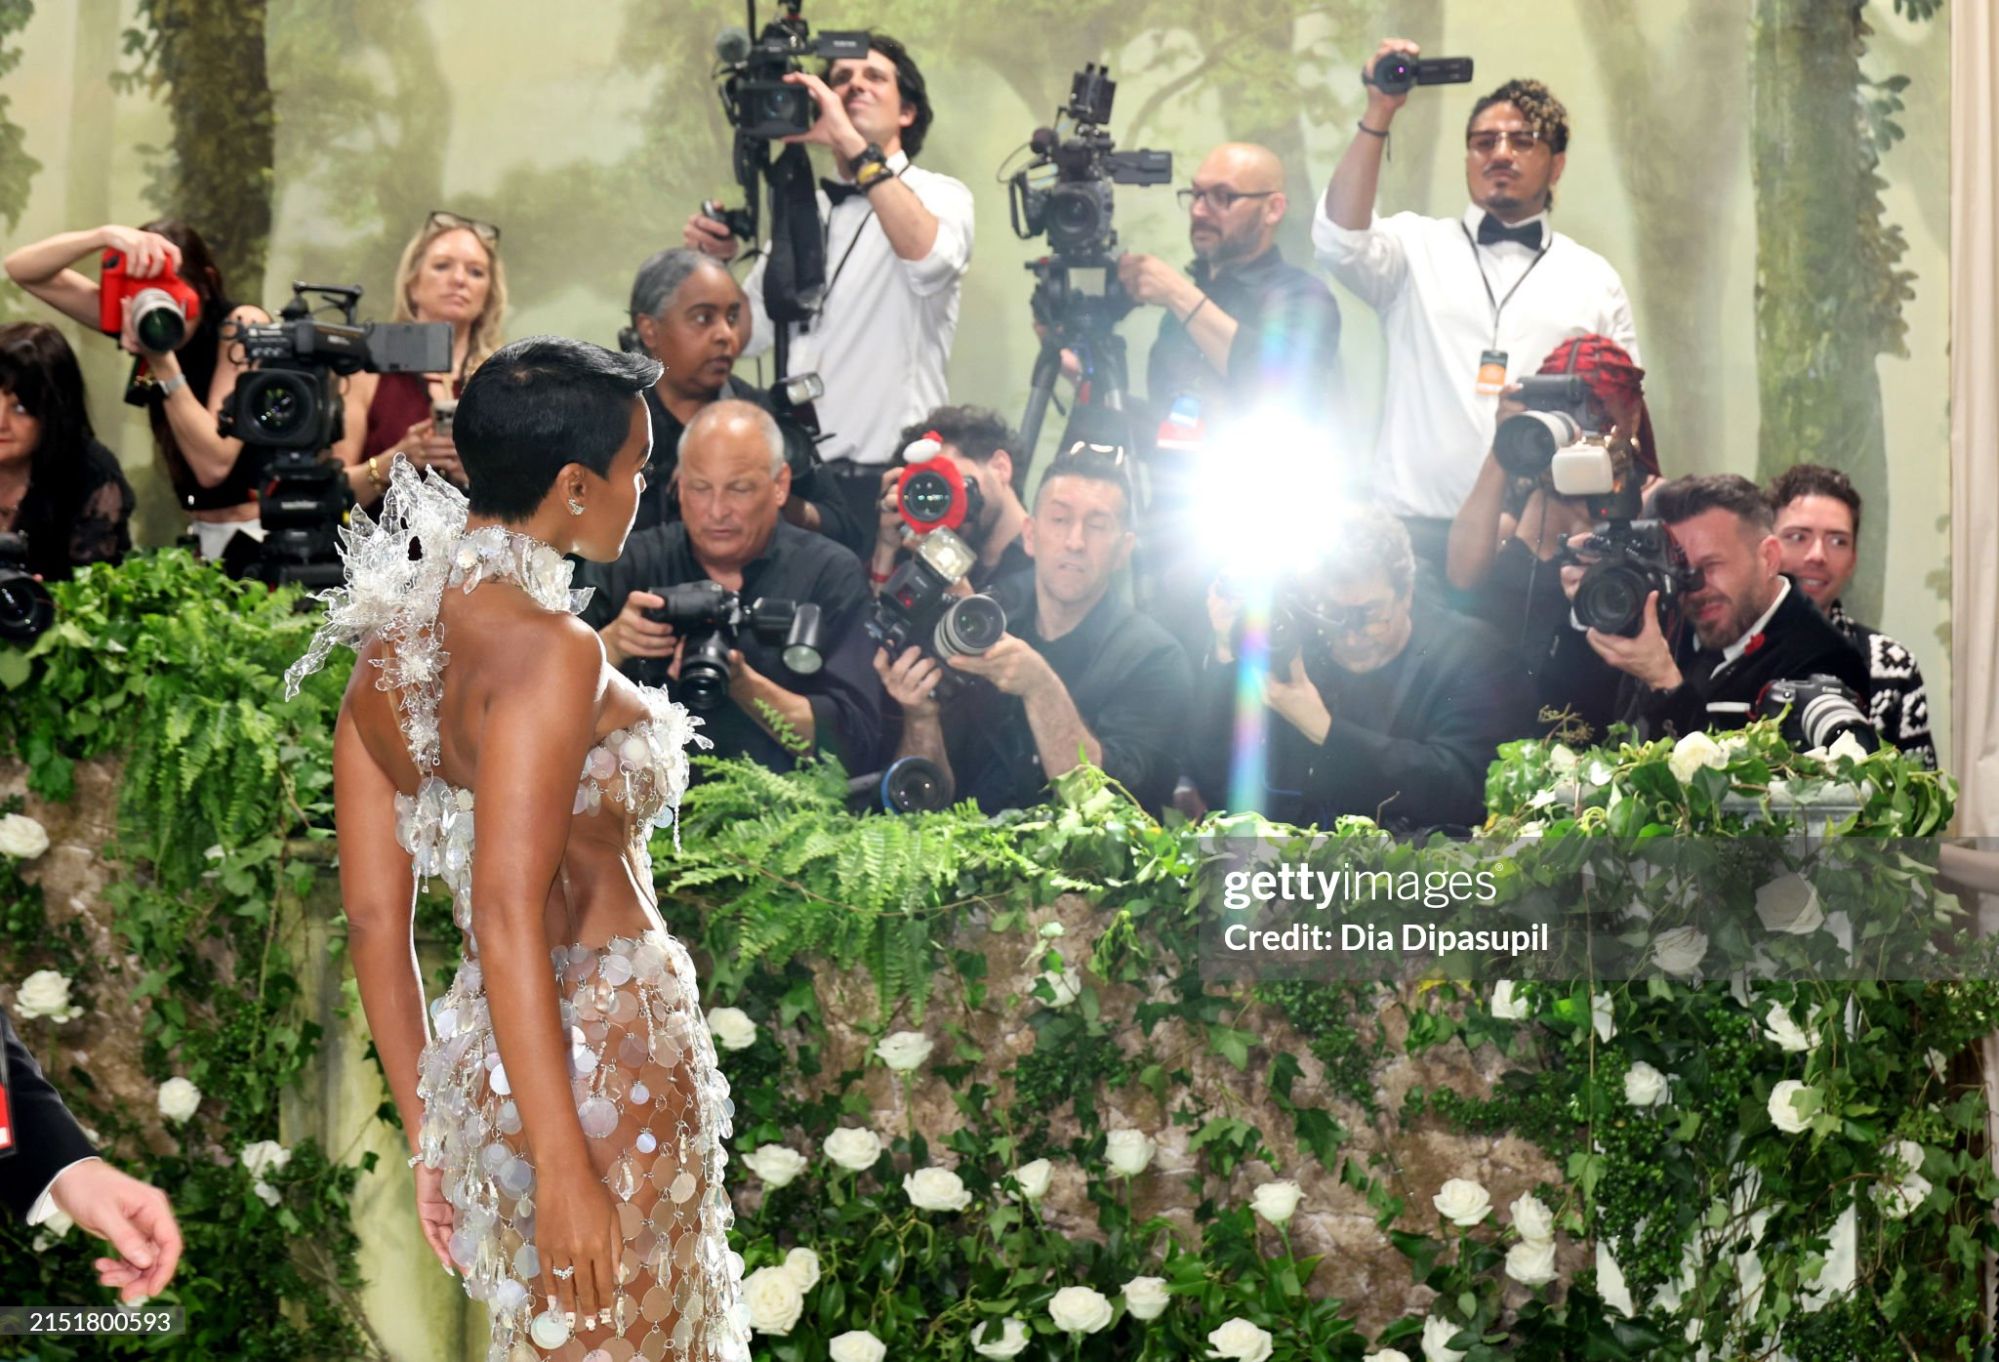 gettyimages-2151800593-2048x2048.jpg